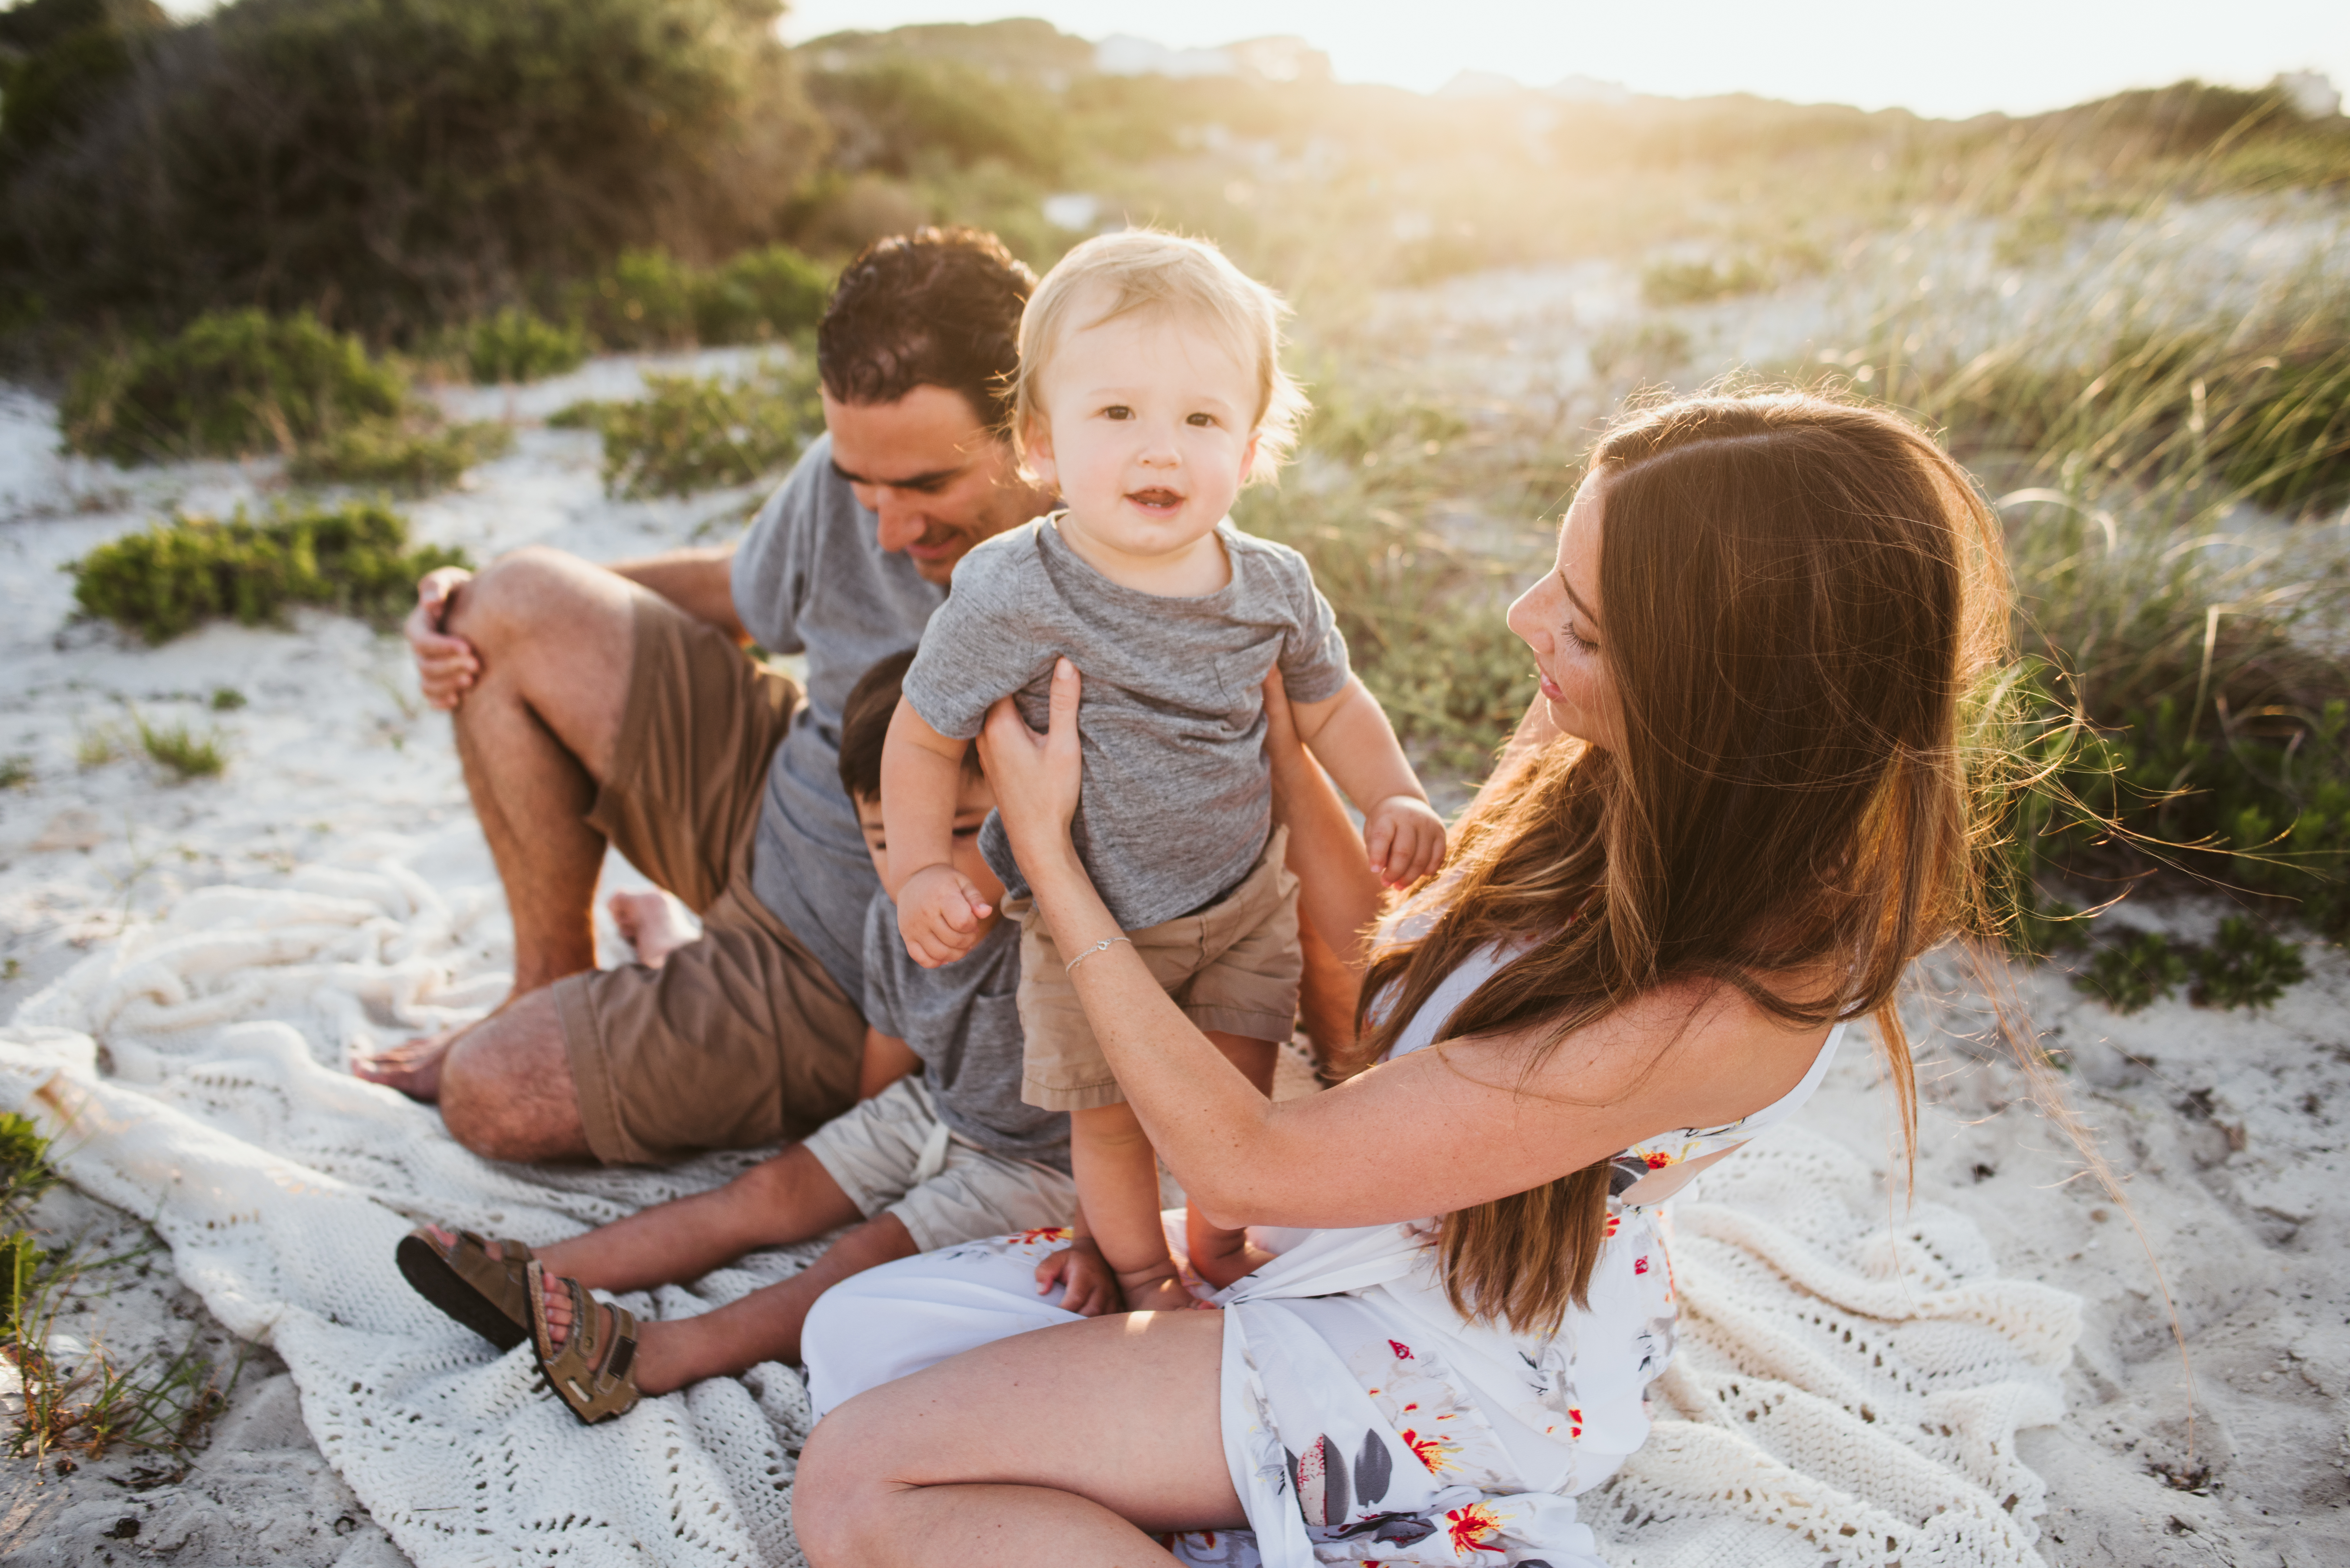 St. Andrews State Park in Panama City Florida Extended Family Beach Session by Kylie Rae Photography